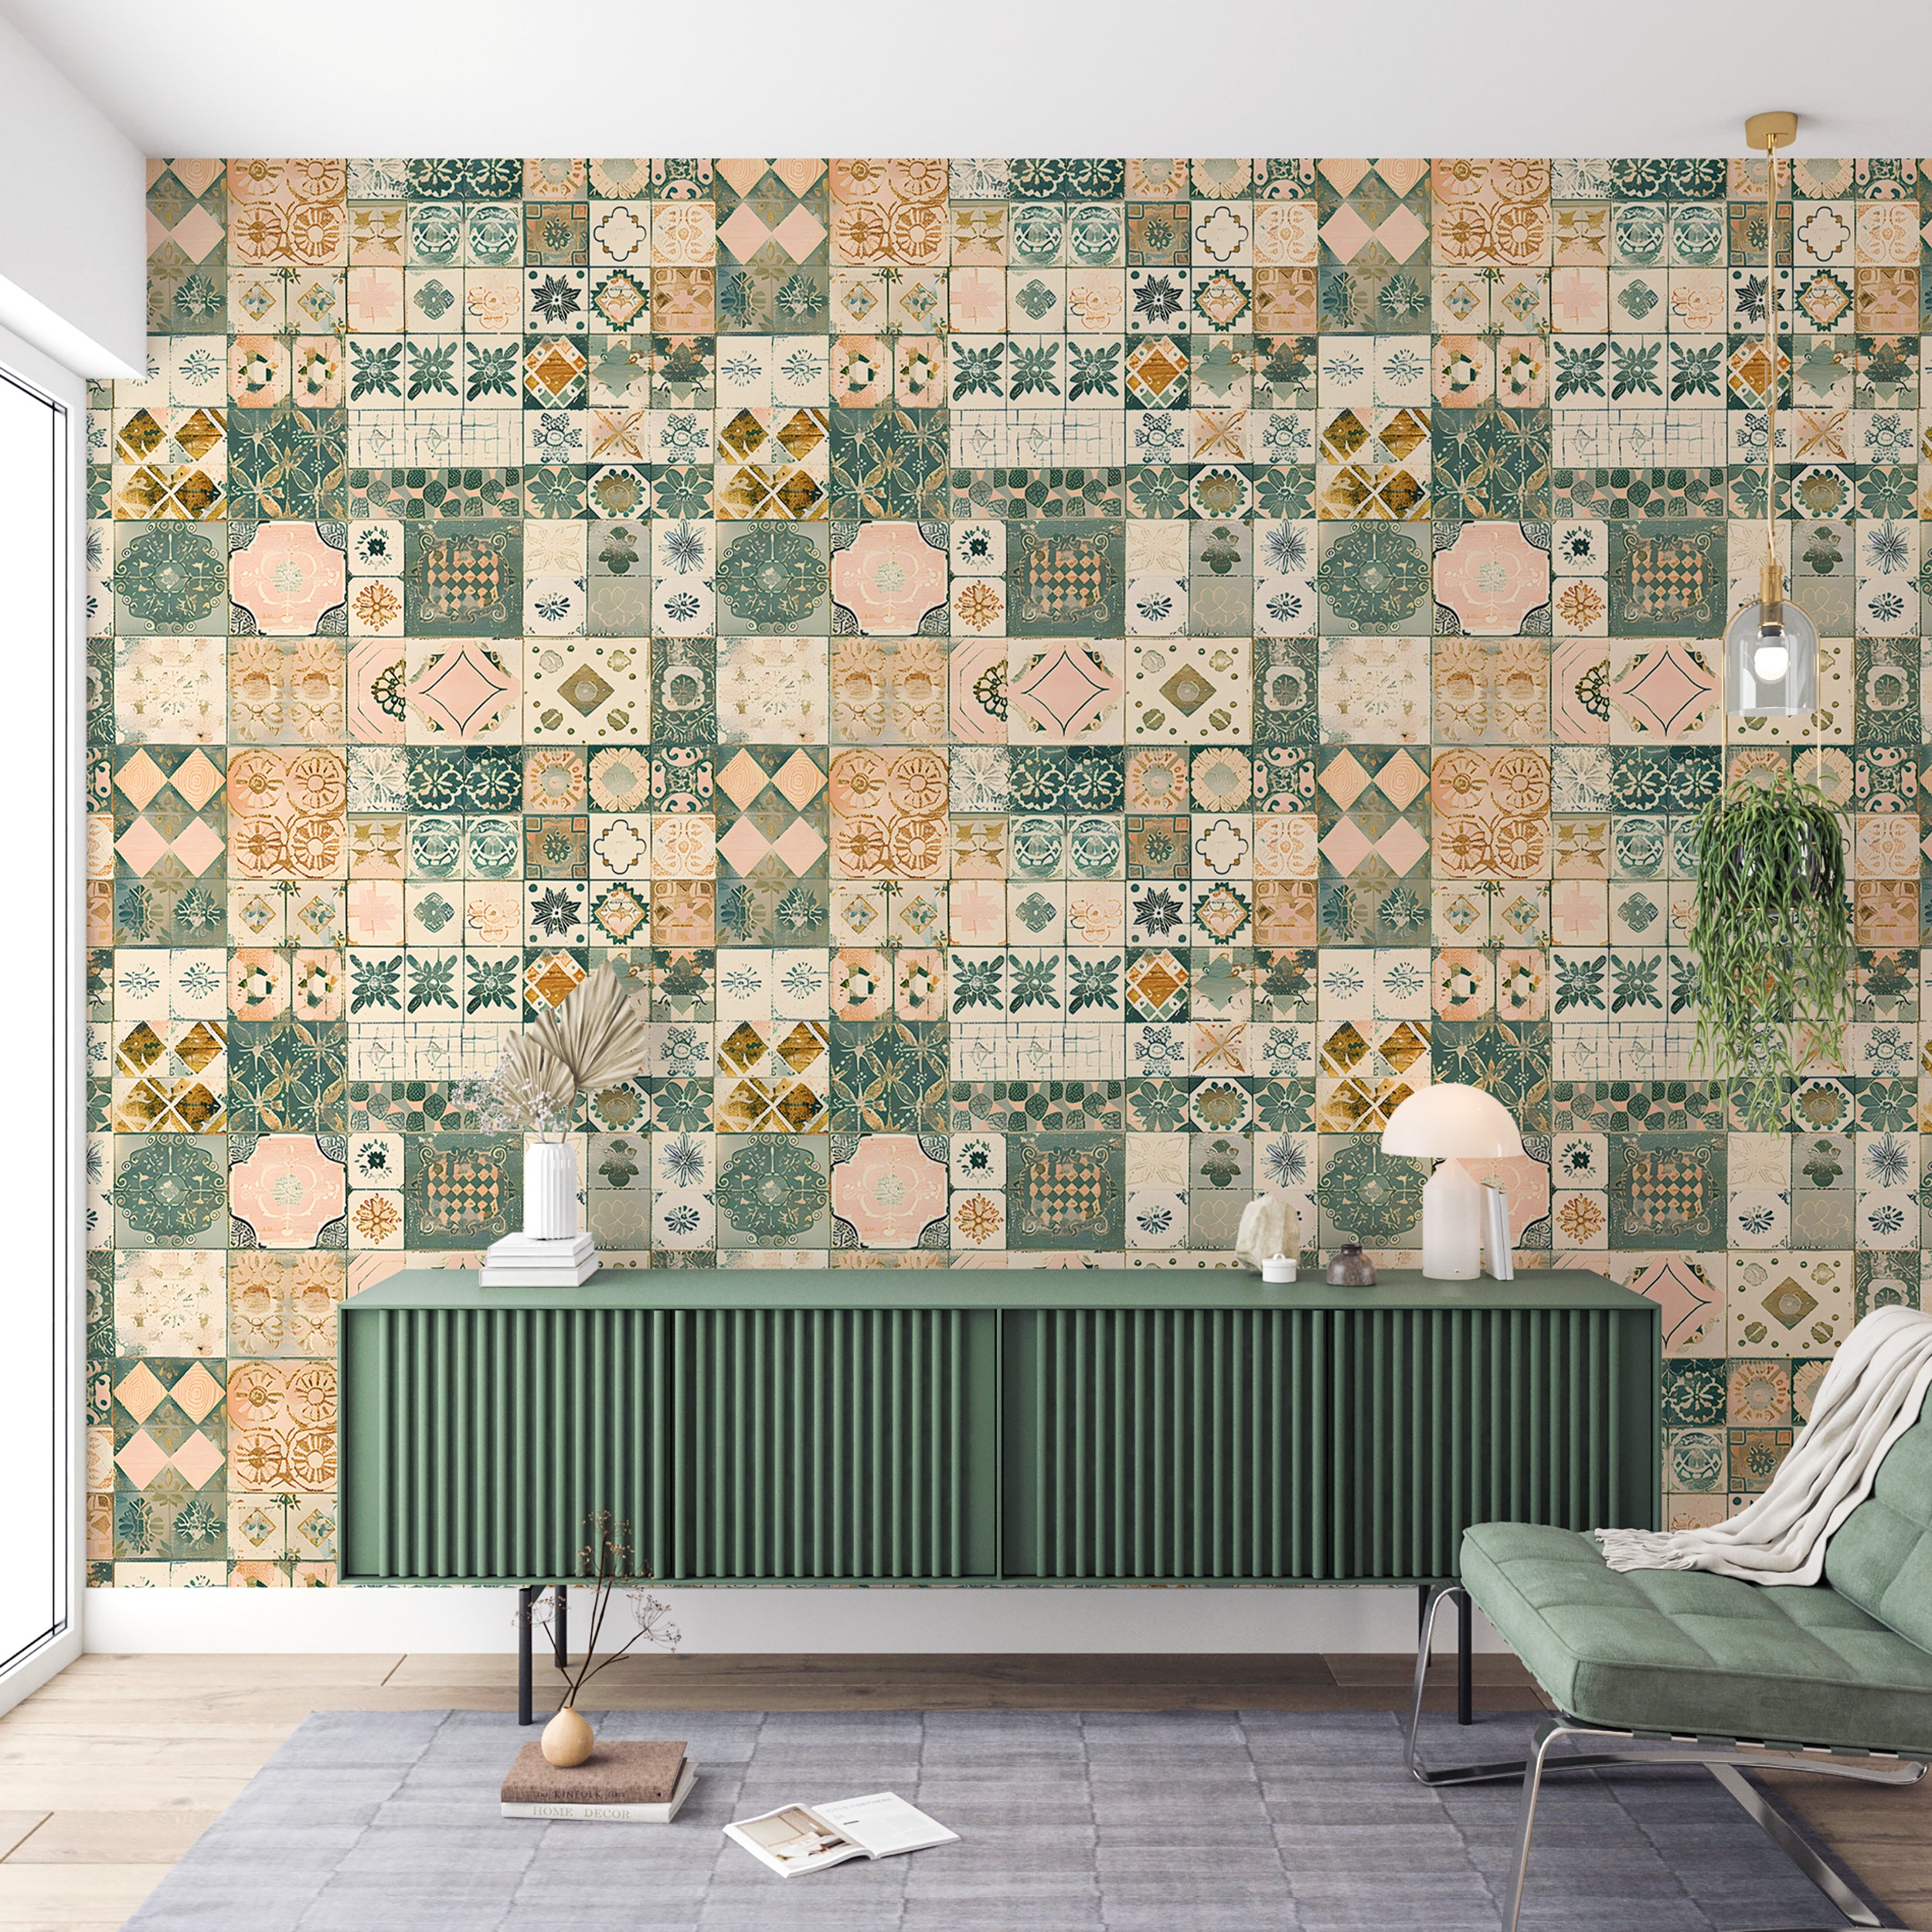 Moroccan Wallpaper, Patchwork Tiles Wallpaper, Green and Beige Tiles Wall Decal, Peel and Stick Watercolor Rustic Tiles Decor